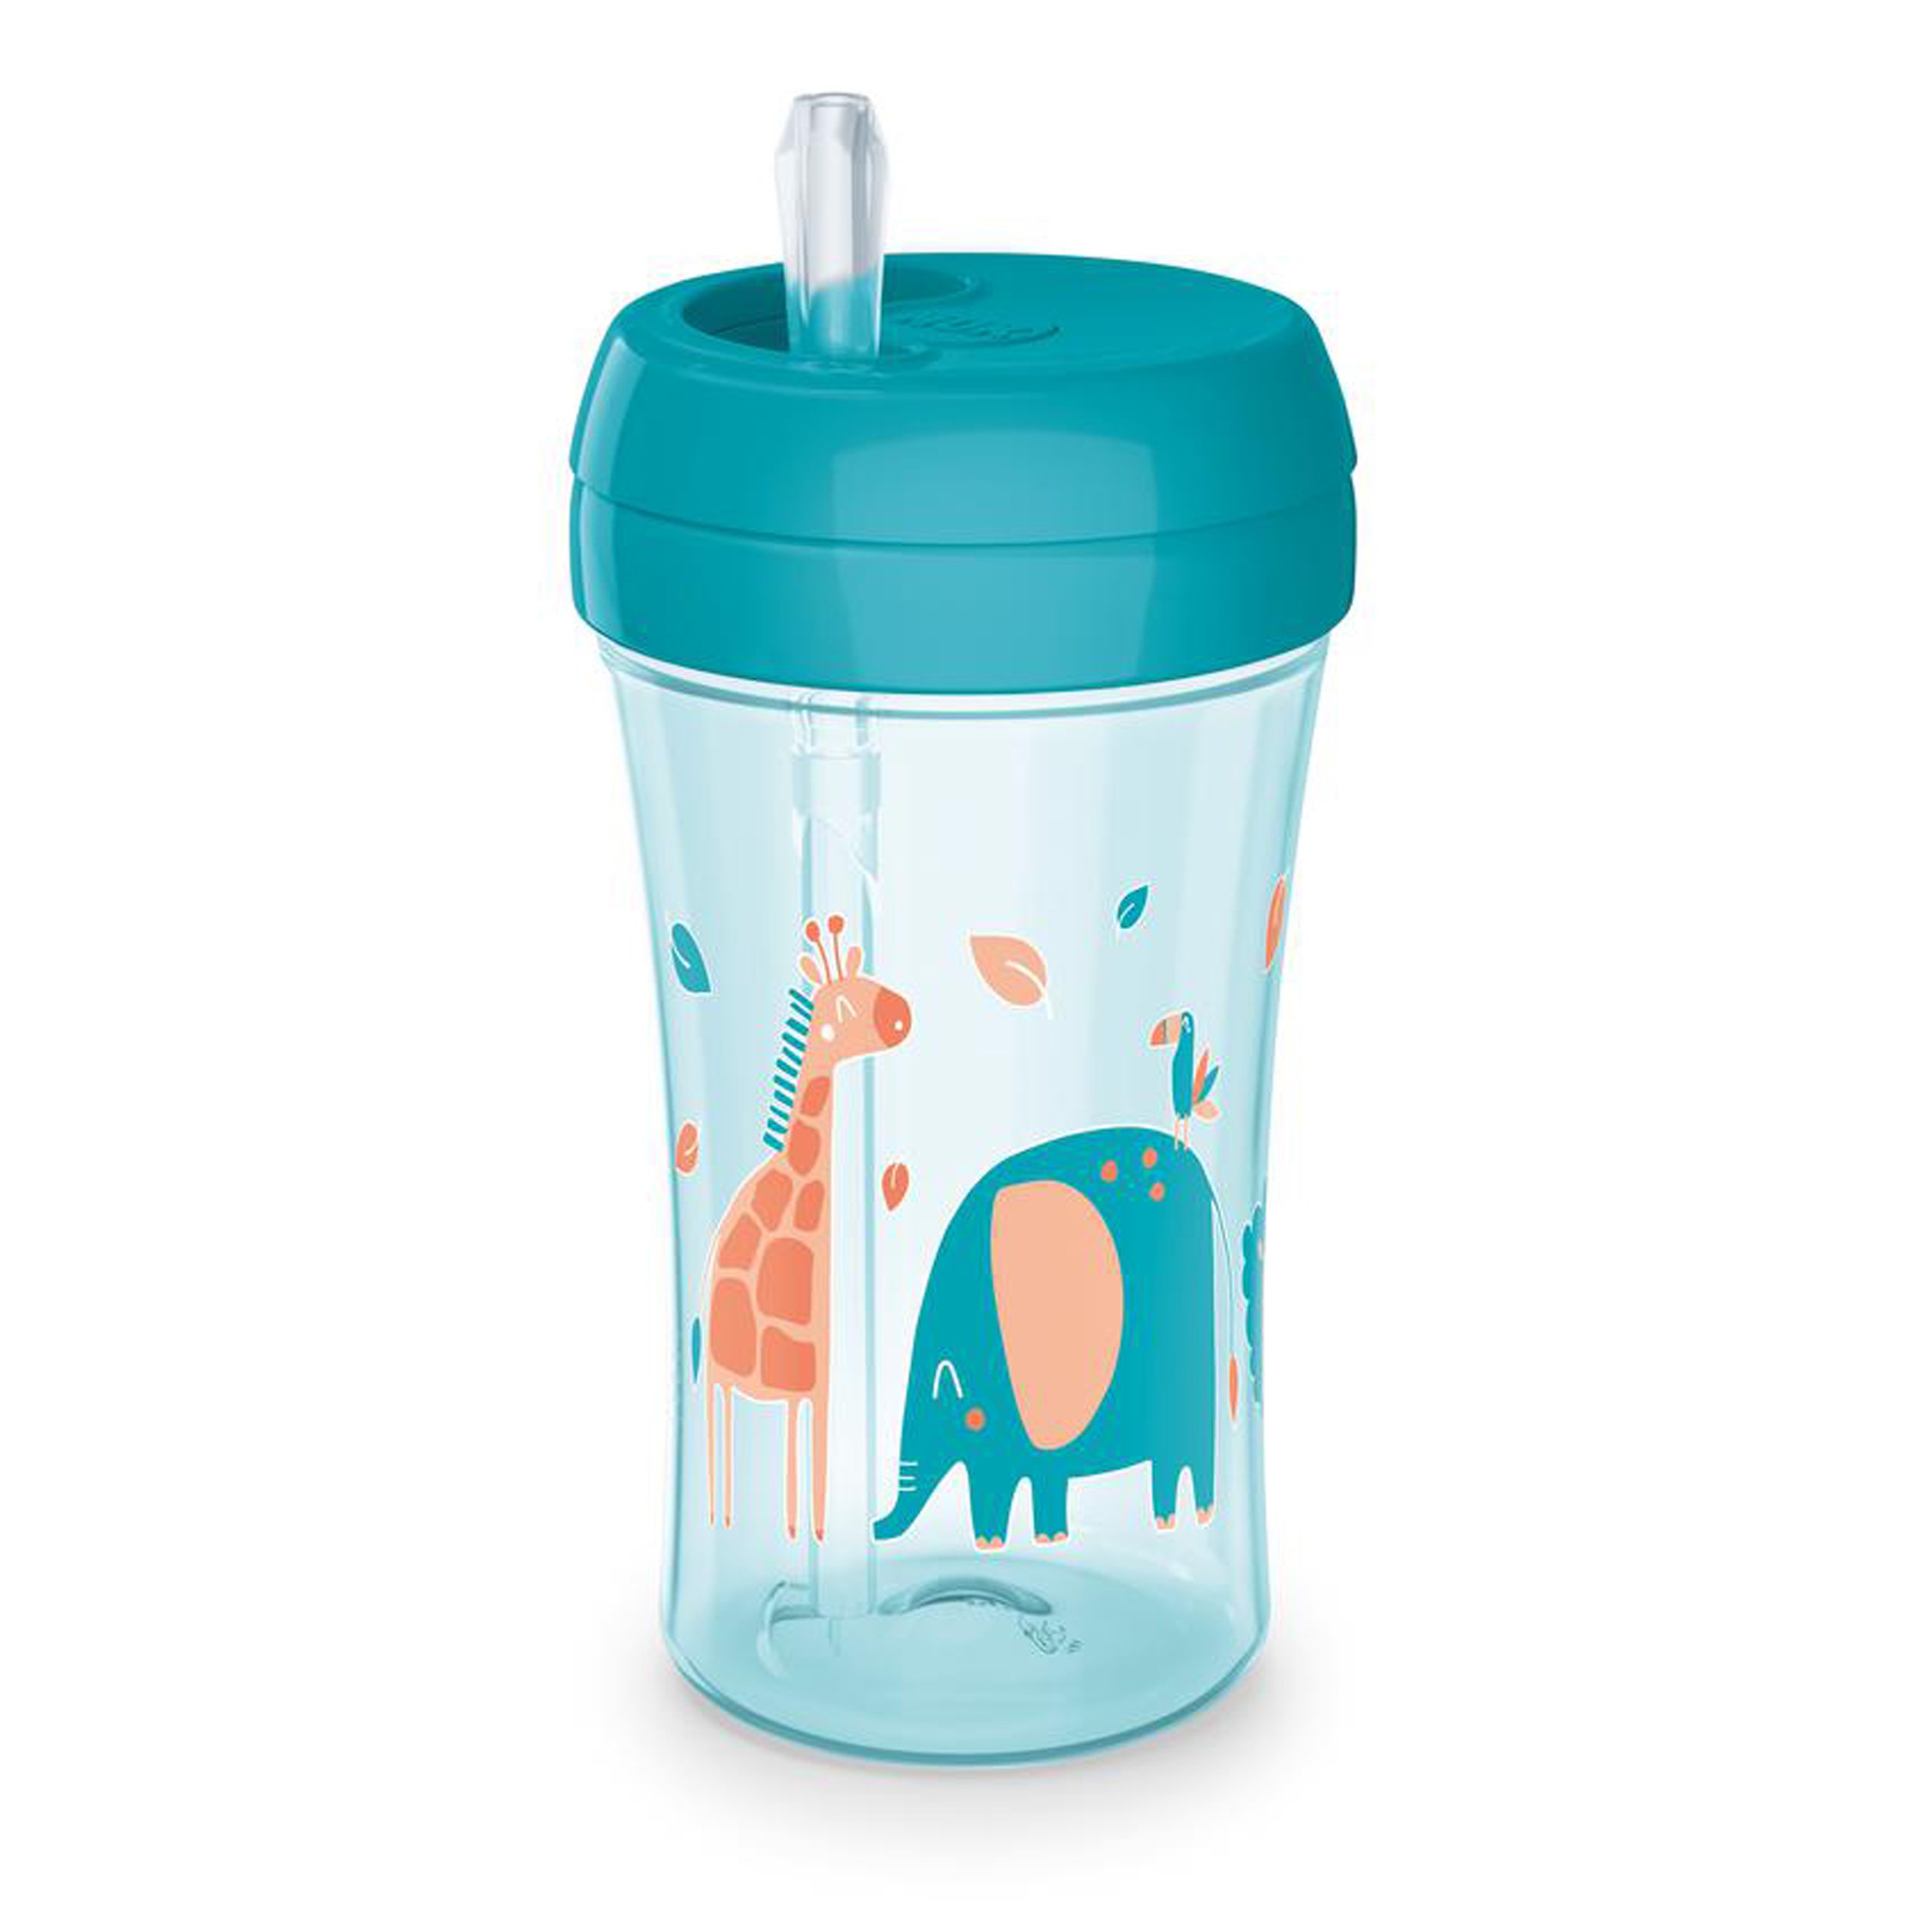 Nuk Learner Straw Cup, 10 oz - Toddler Cup with Soft Straw for Easy Drinking, 8 Months and Up